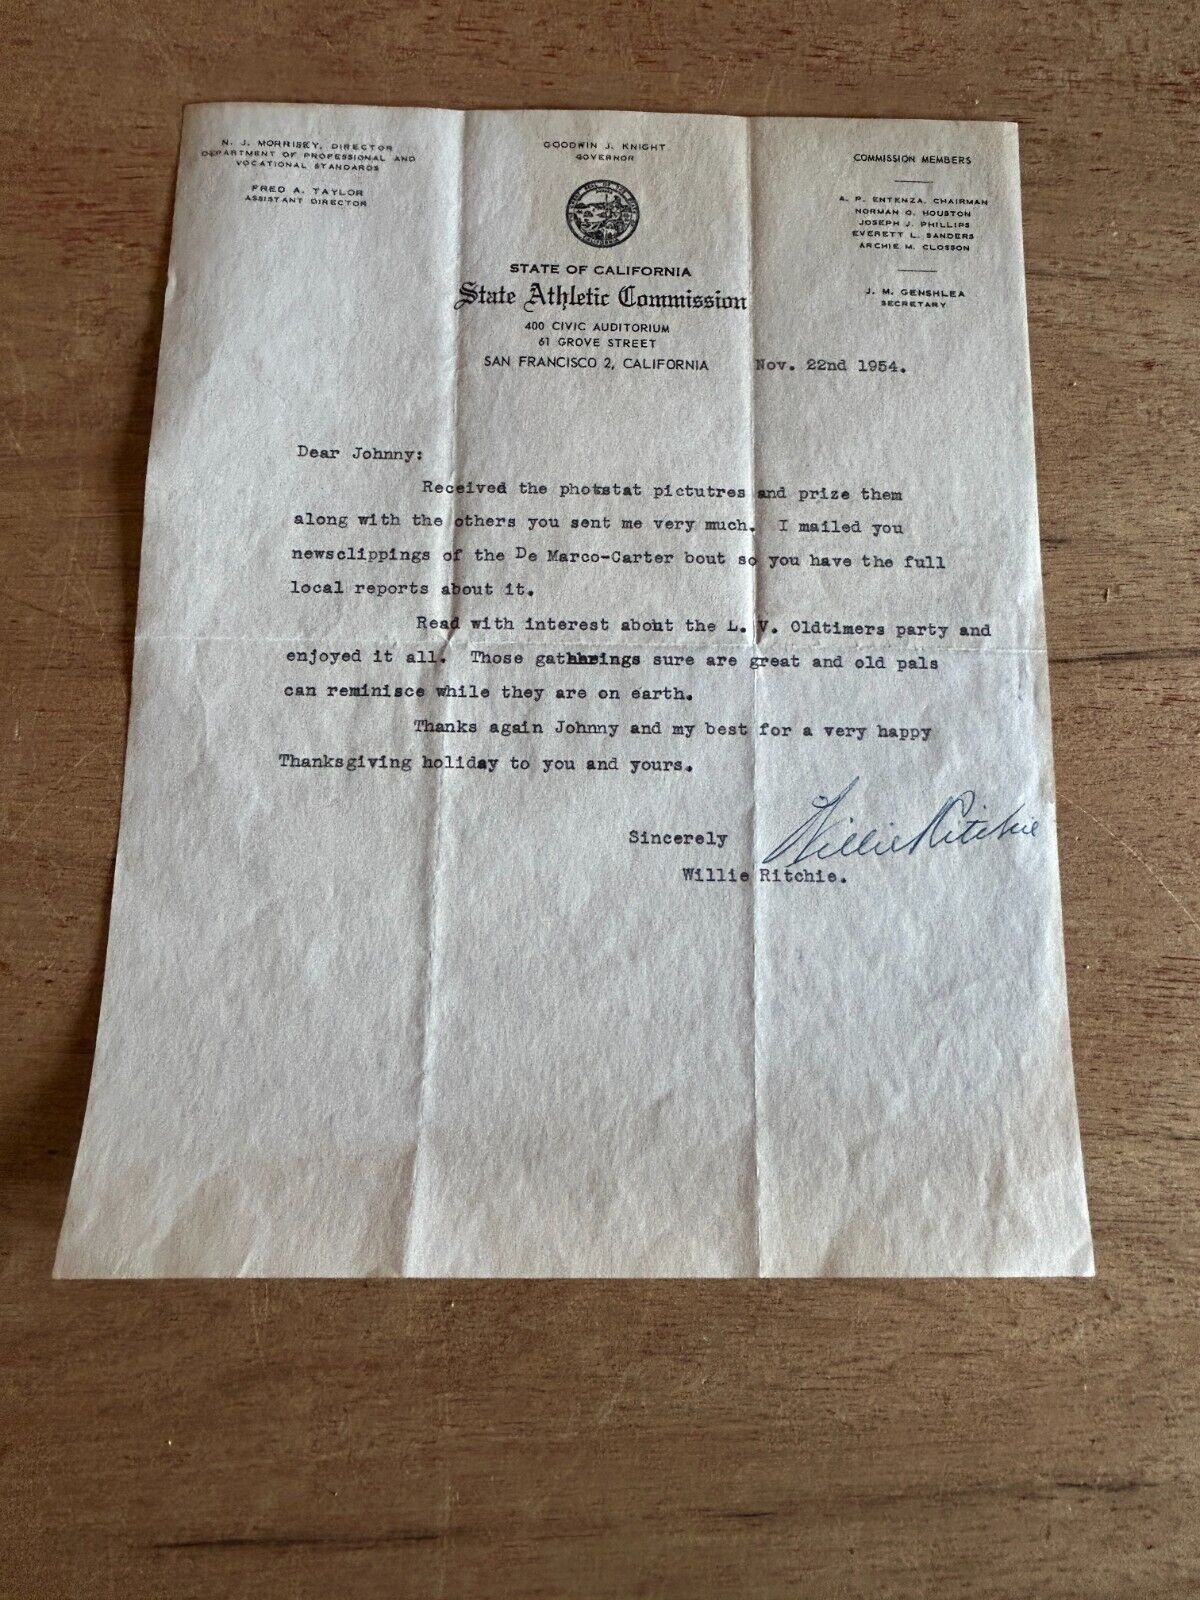 Willie Ritchie Boxer Signed Letter Calif State Athletic Comm Letterhead Champ